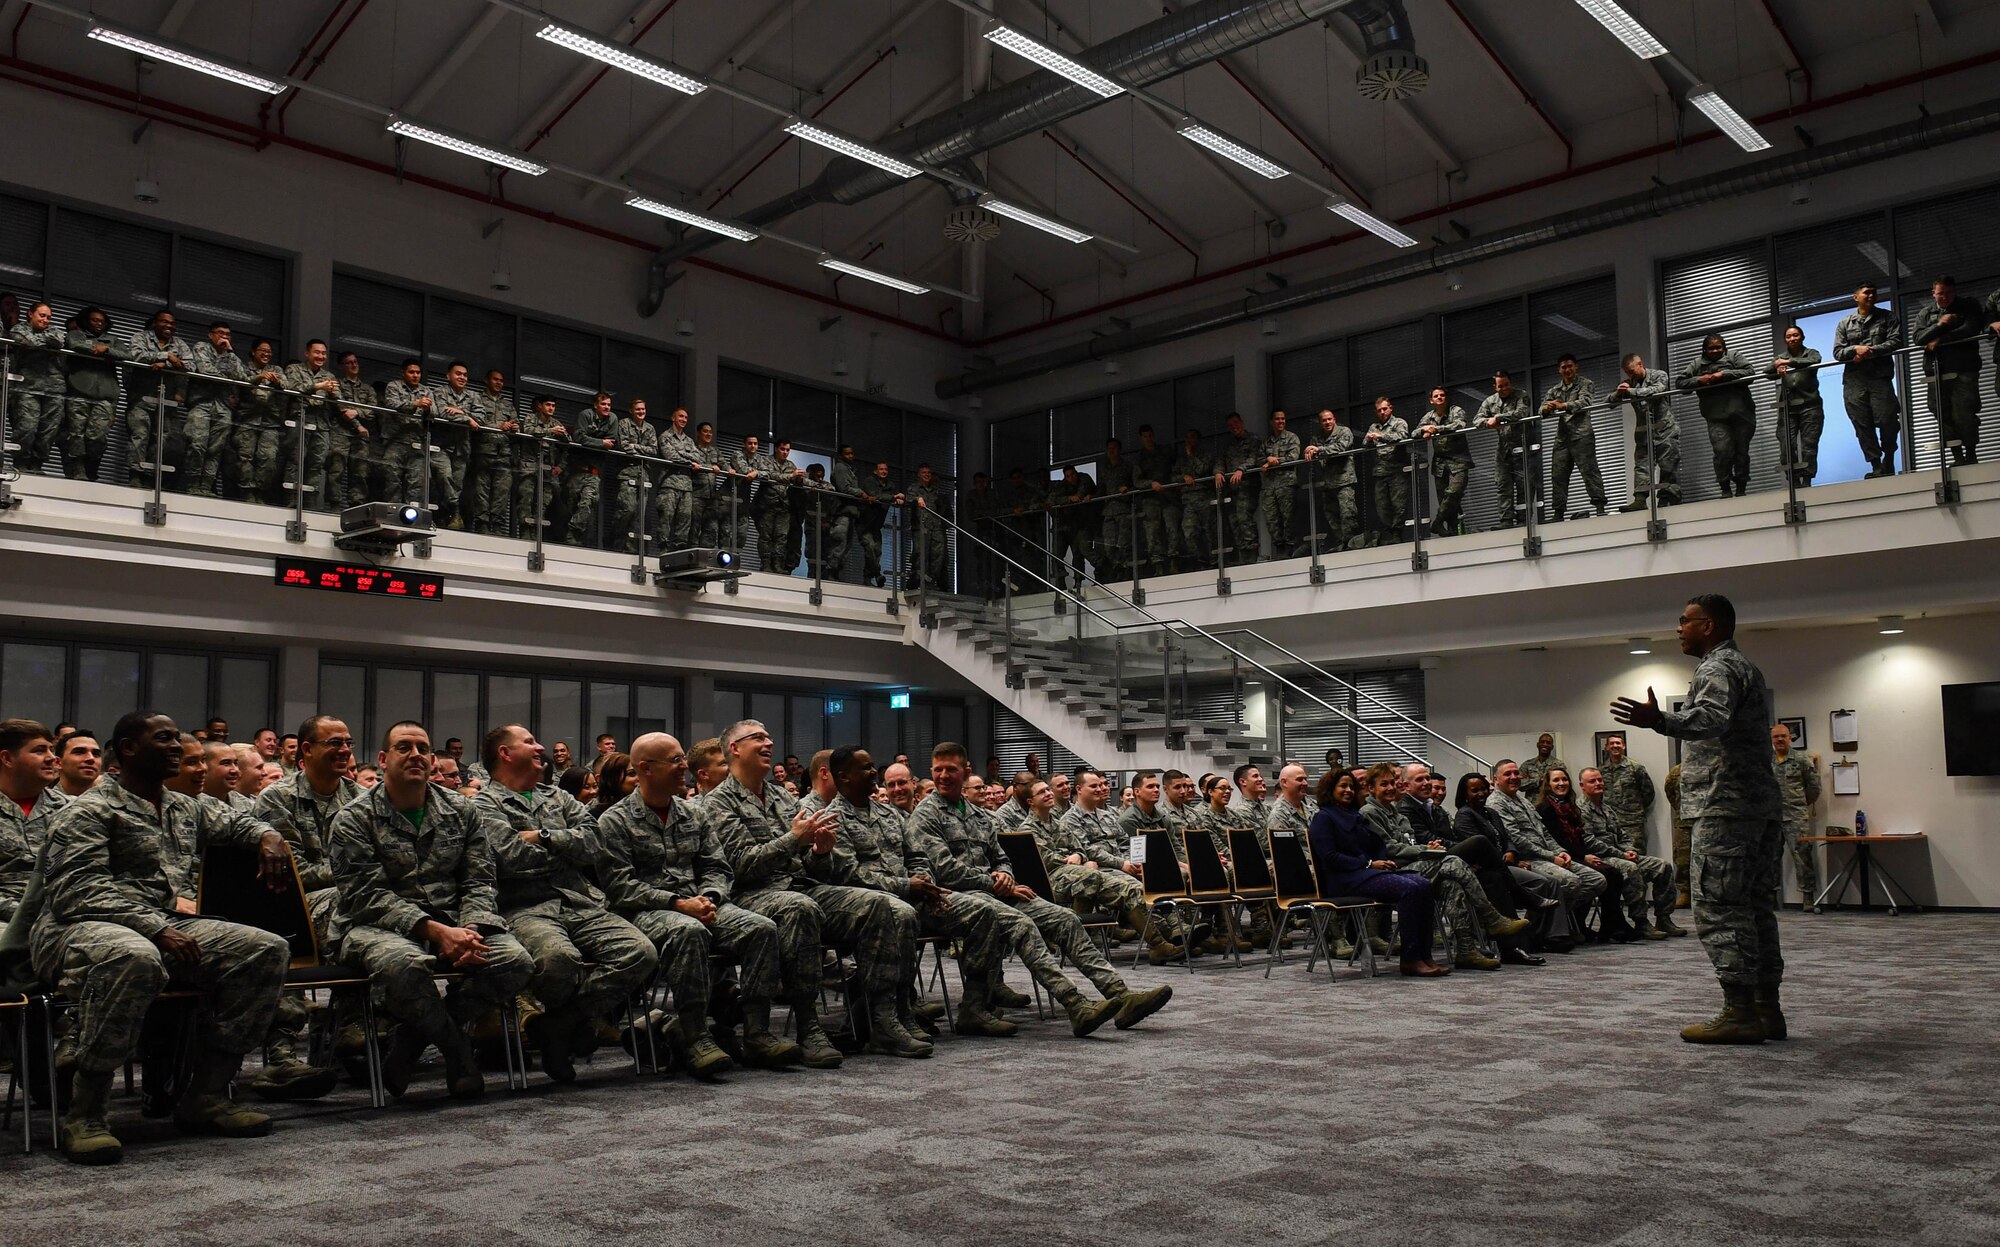 Lt. Gen. Richard M. Clark, 3rd Air Force commander, speaks to Airmen at a commander’s call during an immersion tour of the 435th Air Ground Operations Wing at Ramstein Air Base, Germany, Feb. 3, 2017. Clark emphasized the importance of finding a balance between caring for family and completing the mission. (U.S. Air Force photo by Senior Airman Tryphena Mayhugh) 